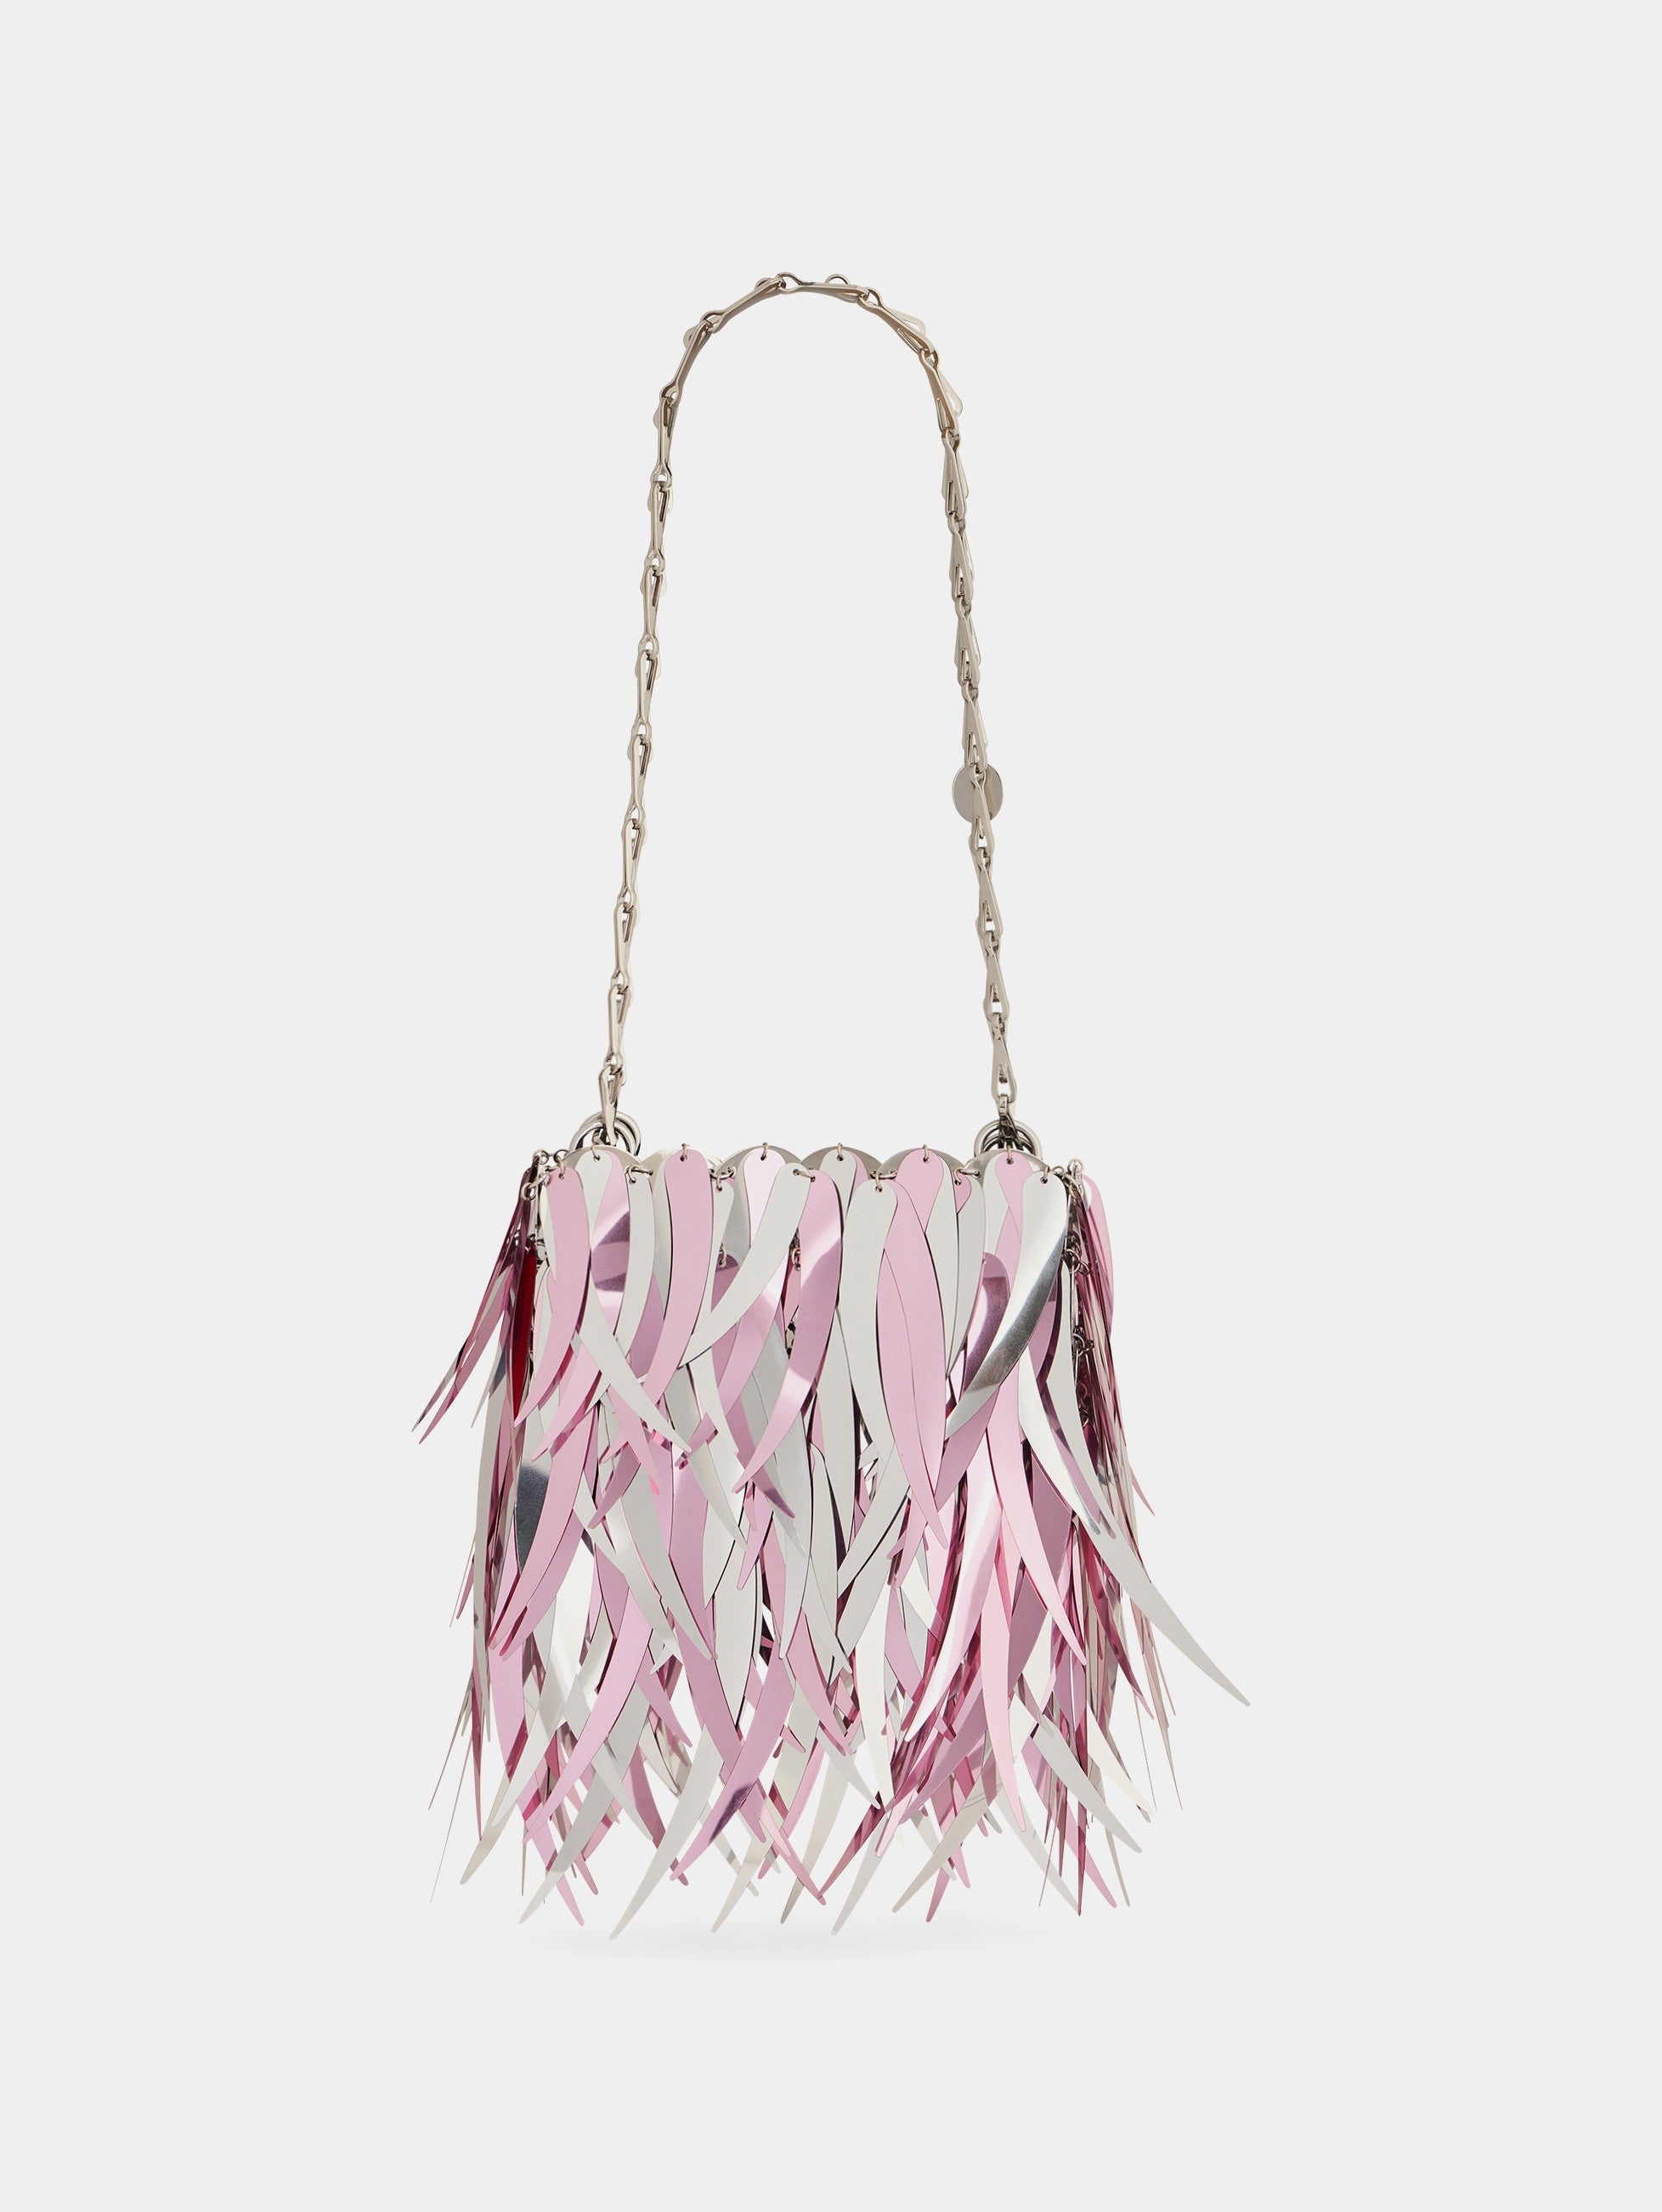 METALLIC PINK BAG WITH FEATHERS ASSEMBLAGE - 1